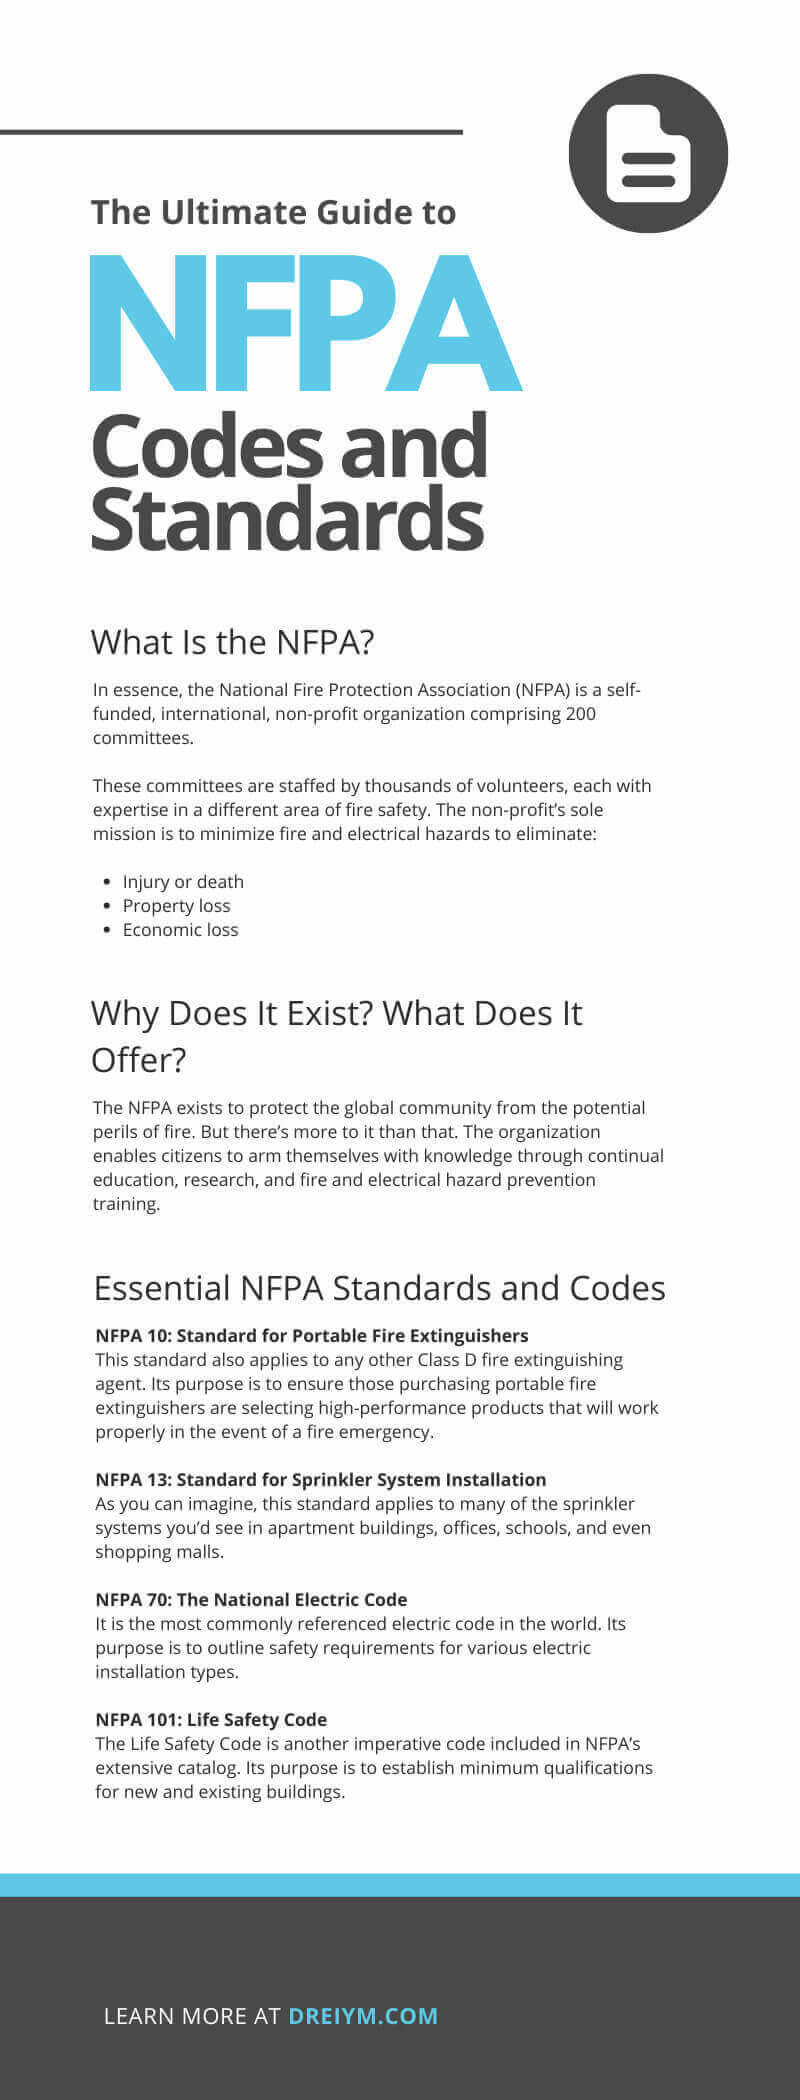 The Ultimate Guide to NFPA Codes and Standards